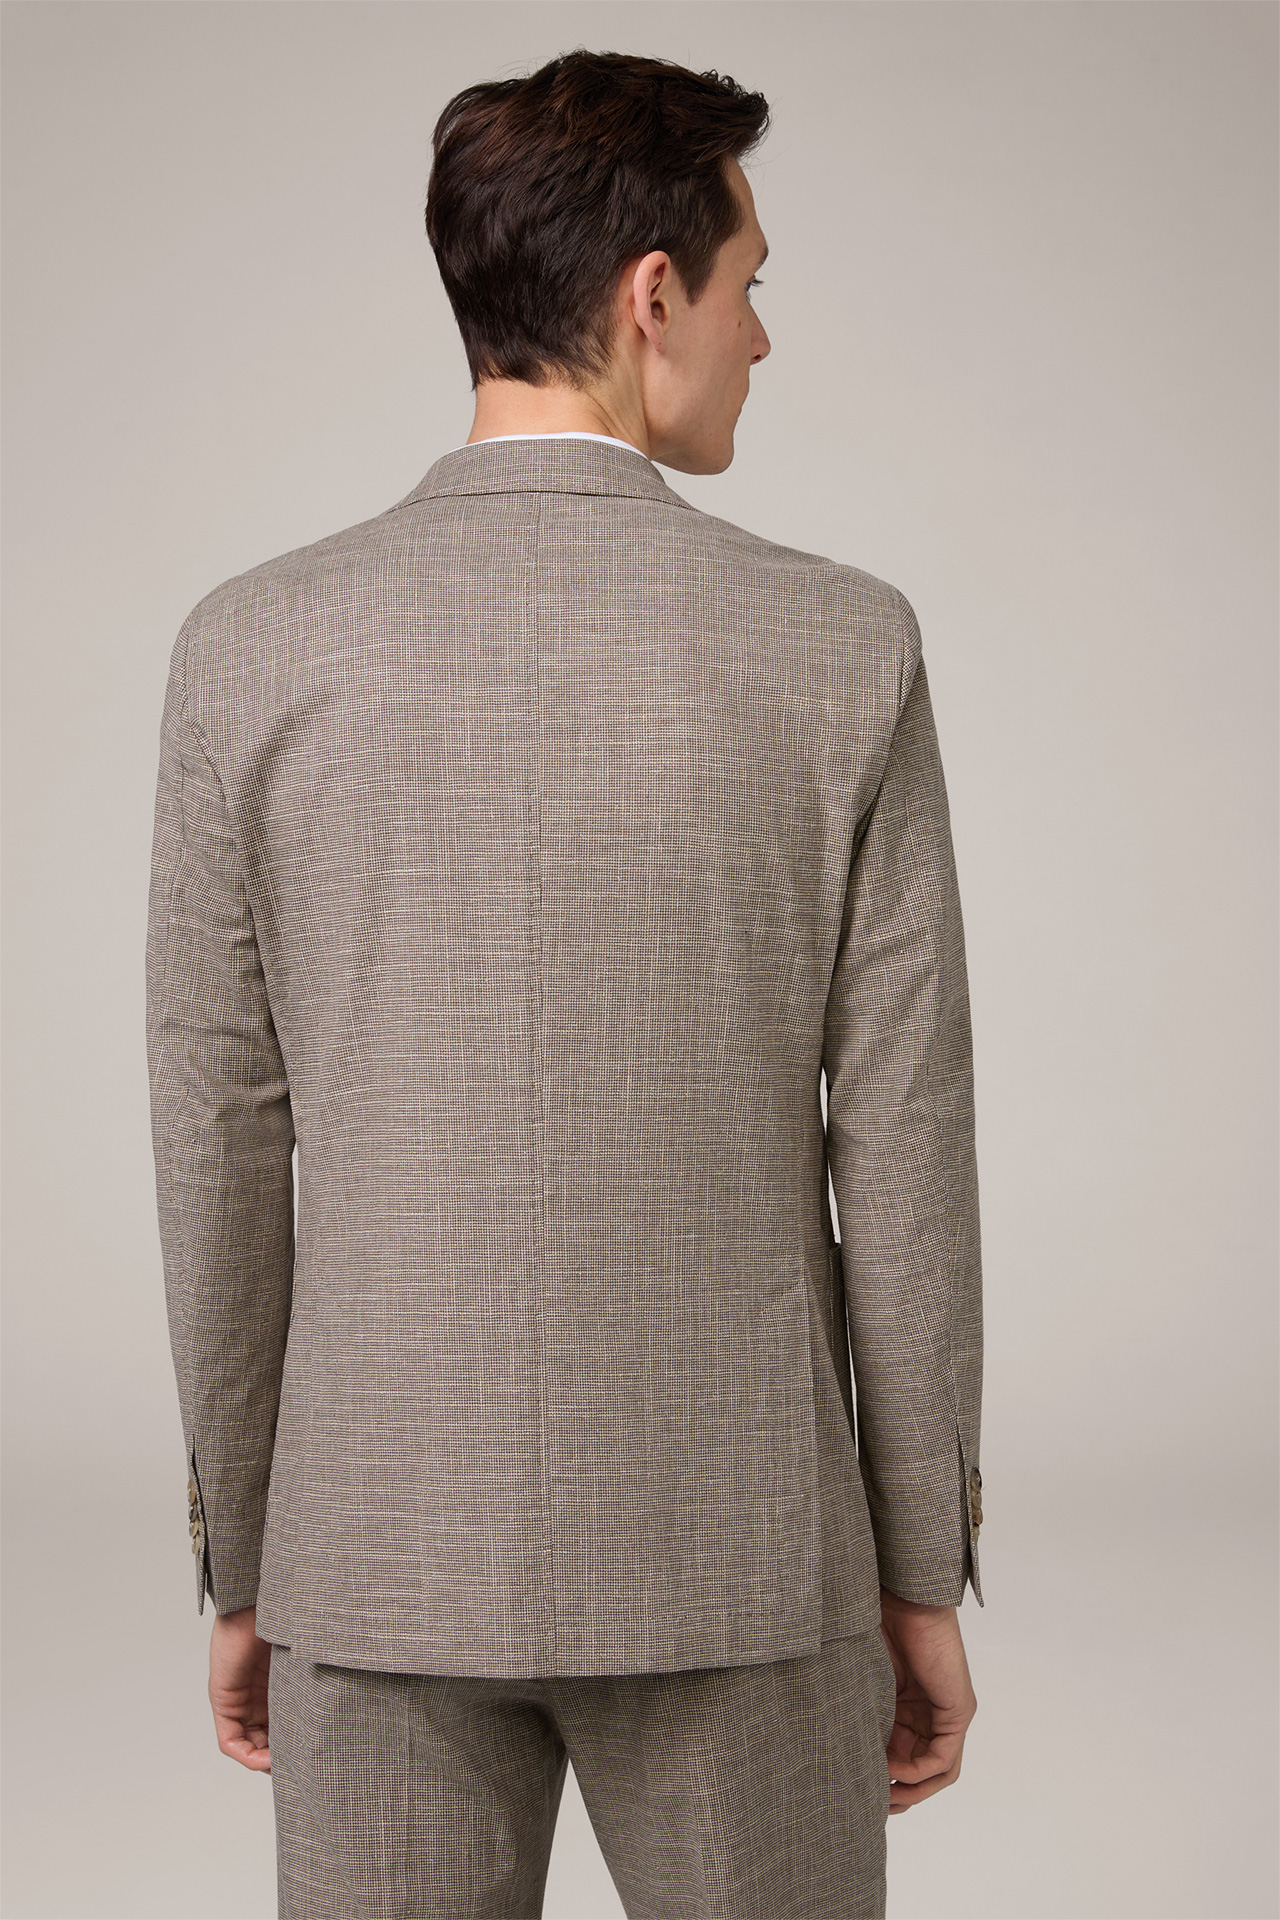 Giro Cotton Blend Modular Jacket with Wool and Linen in Brown and Beige Patterned